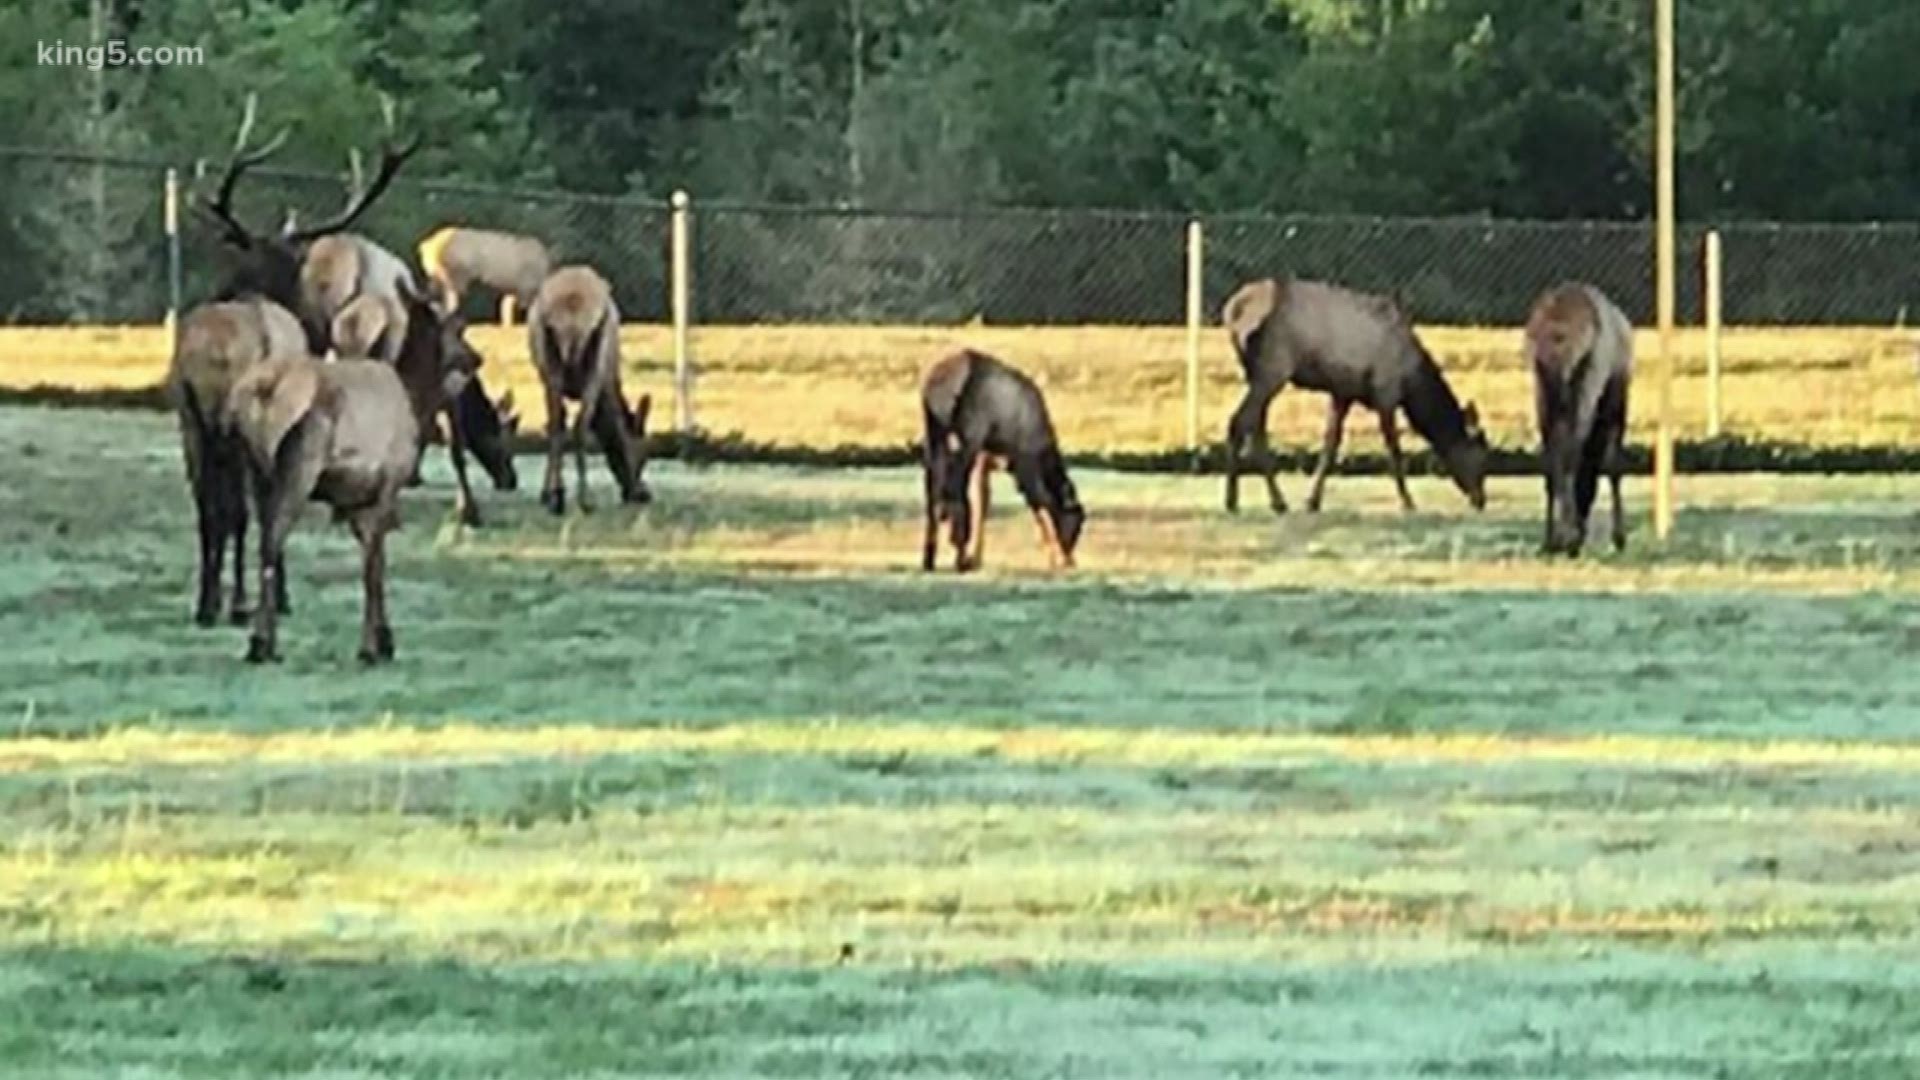 Elk populations are on the rise in the Skagit Valley near Sedro Wooley and Concrete.